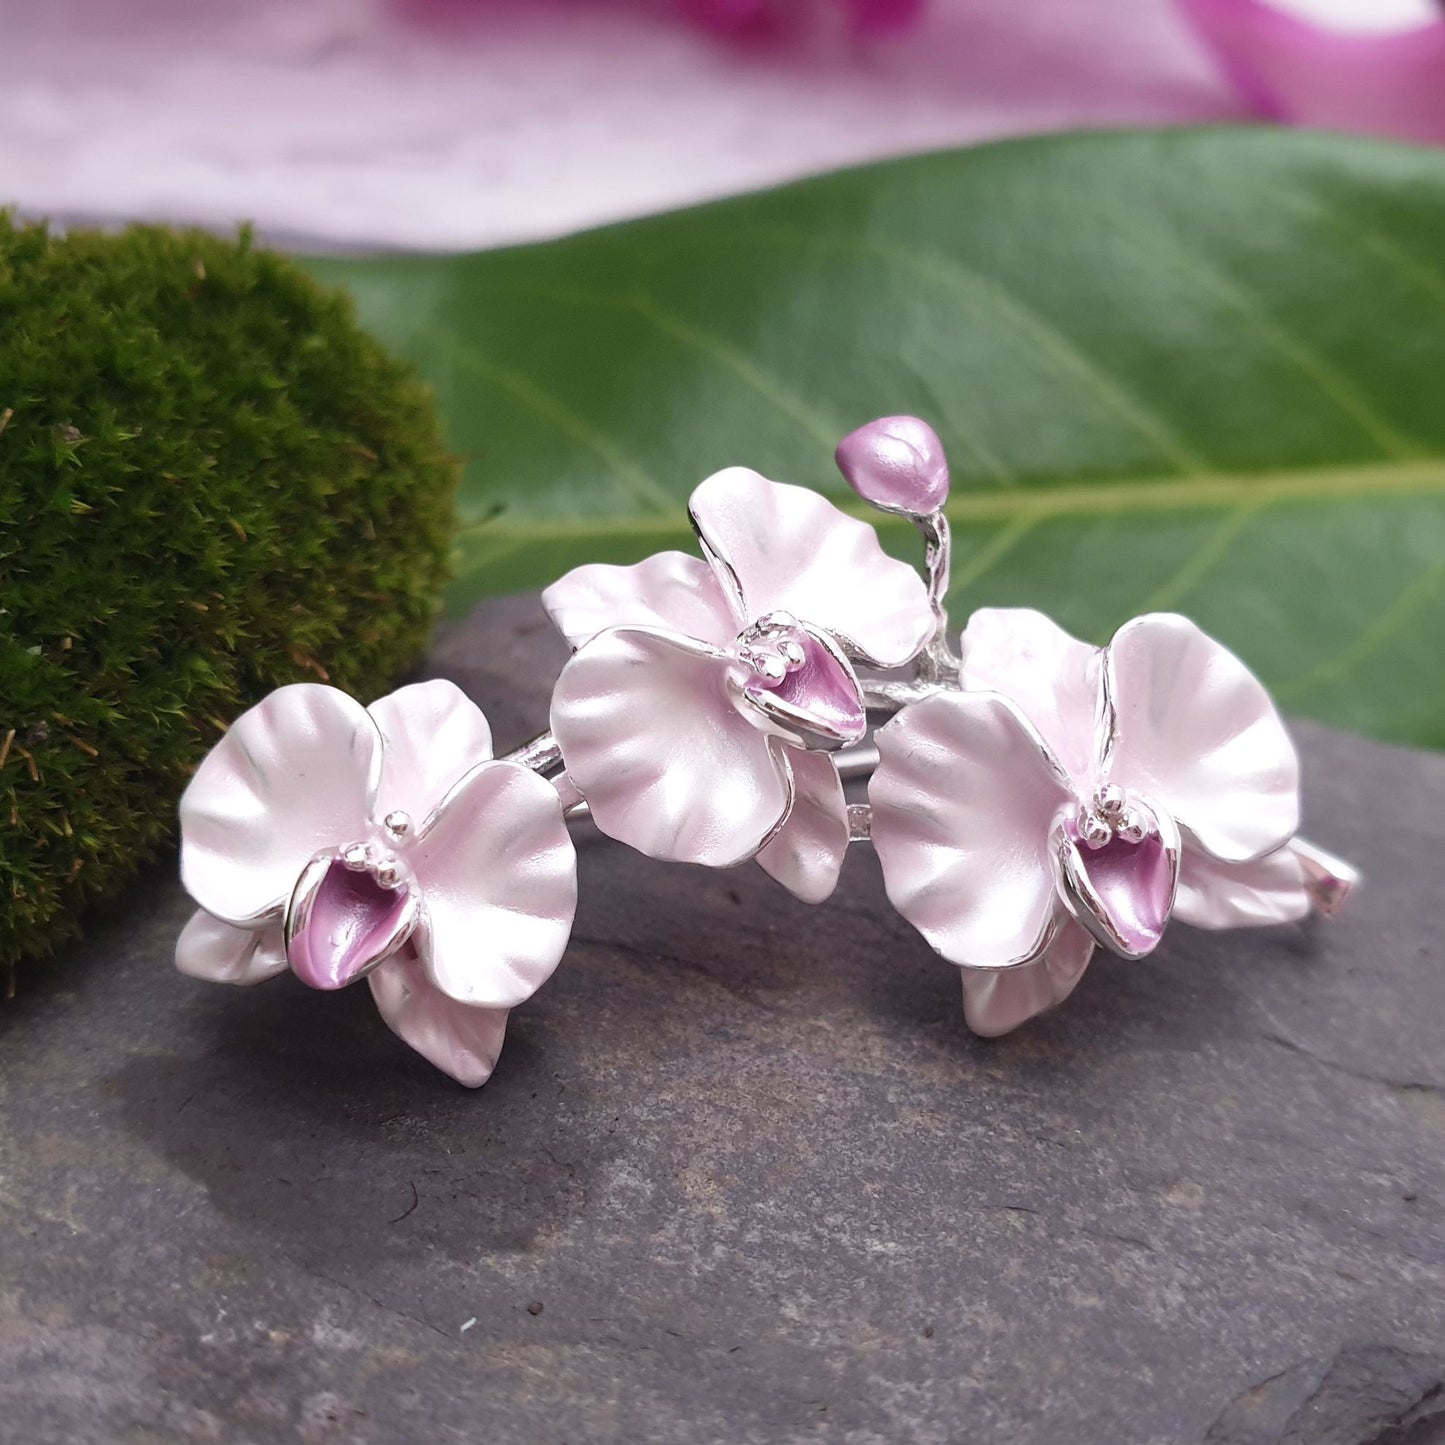 Photo of a spray of pink orchid flowers on a silver stem as a ladies brooch